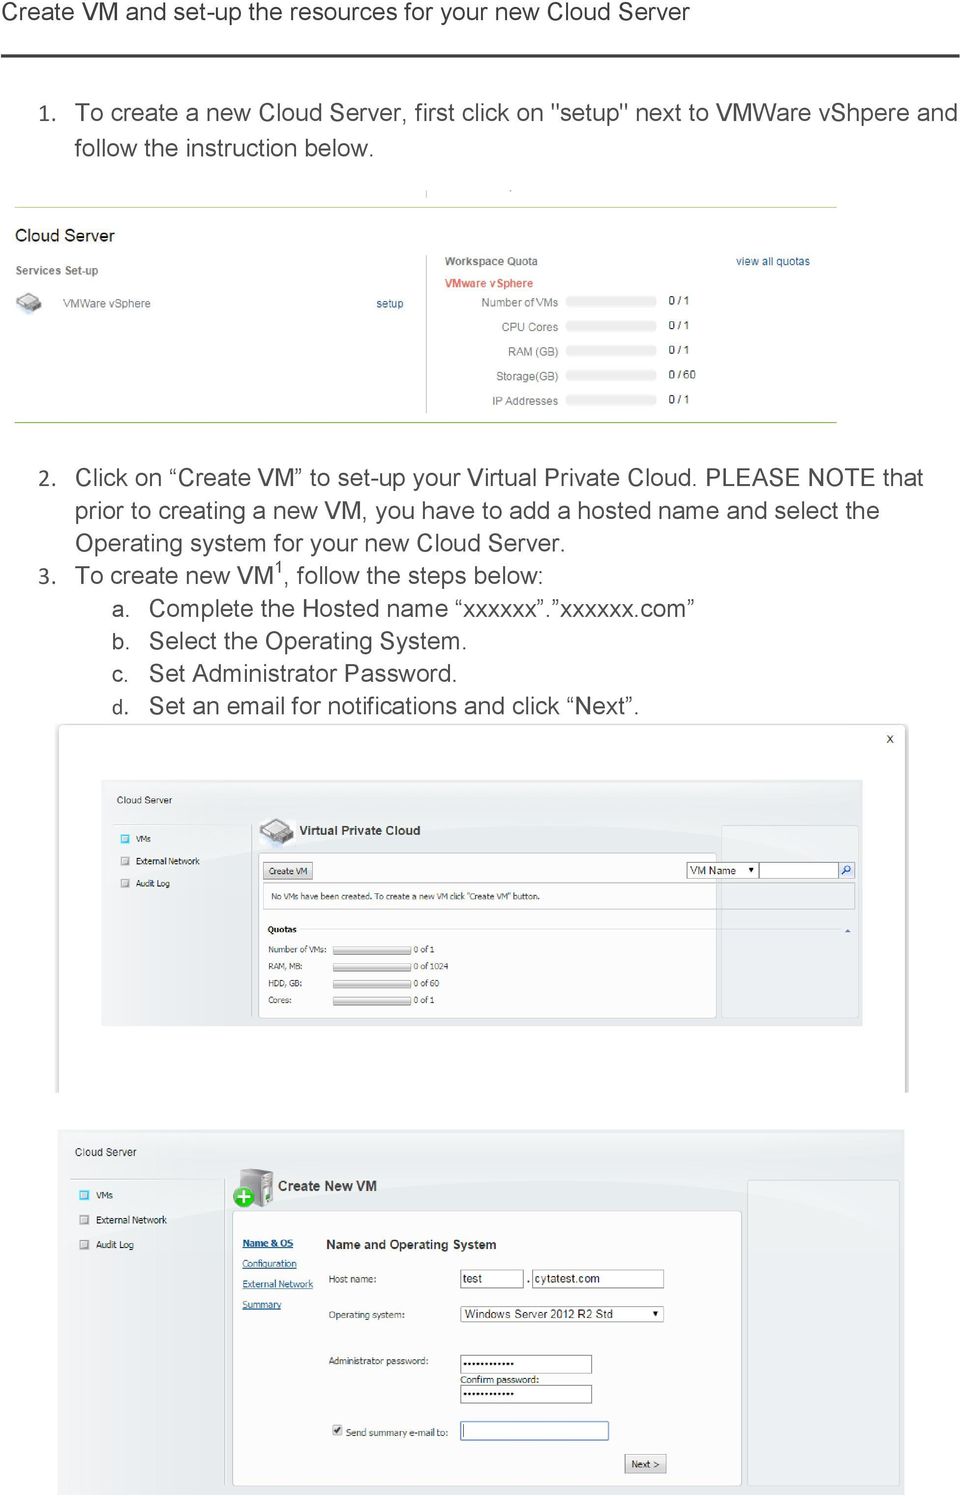 Click on Create VM to set-up your Virtual Private Cloud.